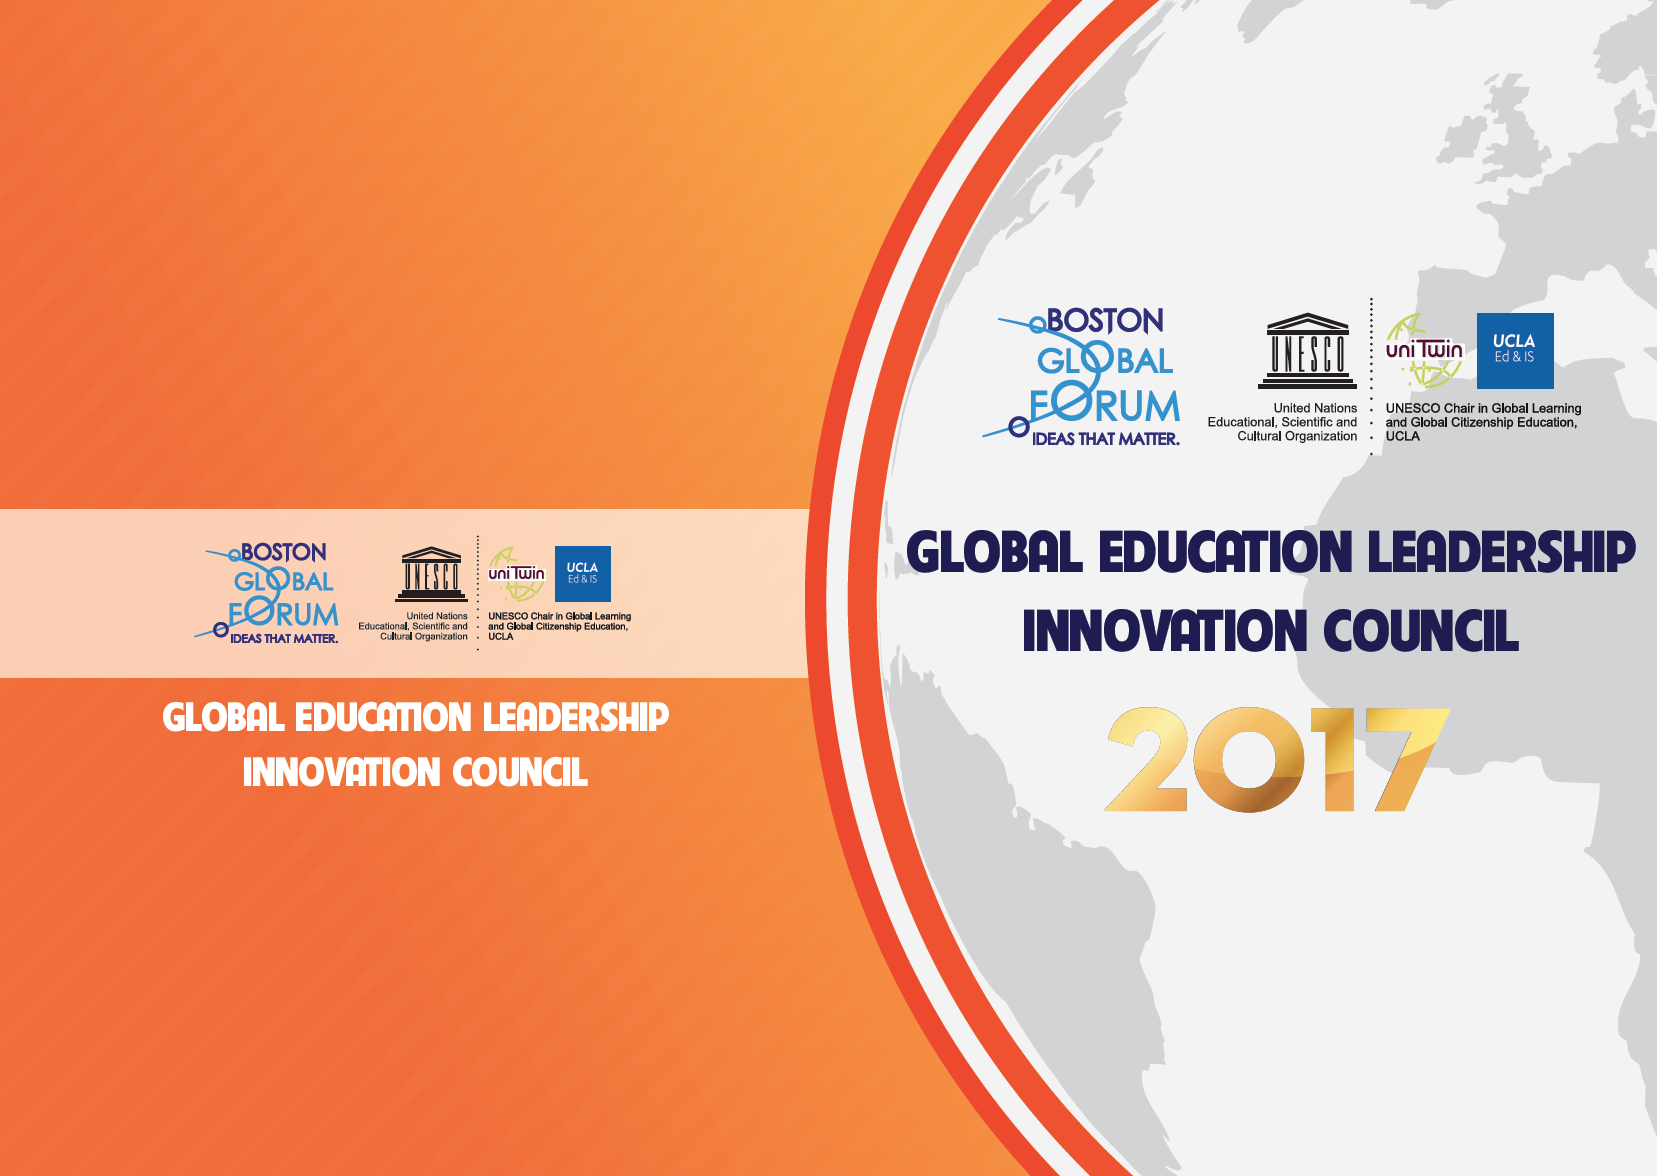 UNESCO Chair on Global Learning and Global Citizenship Education and Boston Global Forum Create The Global Education Leadership Innovation Council